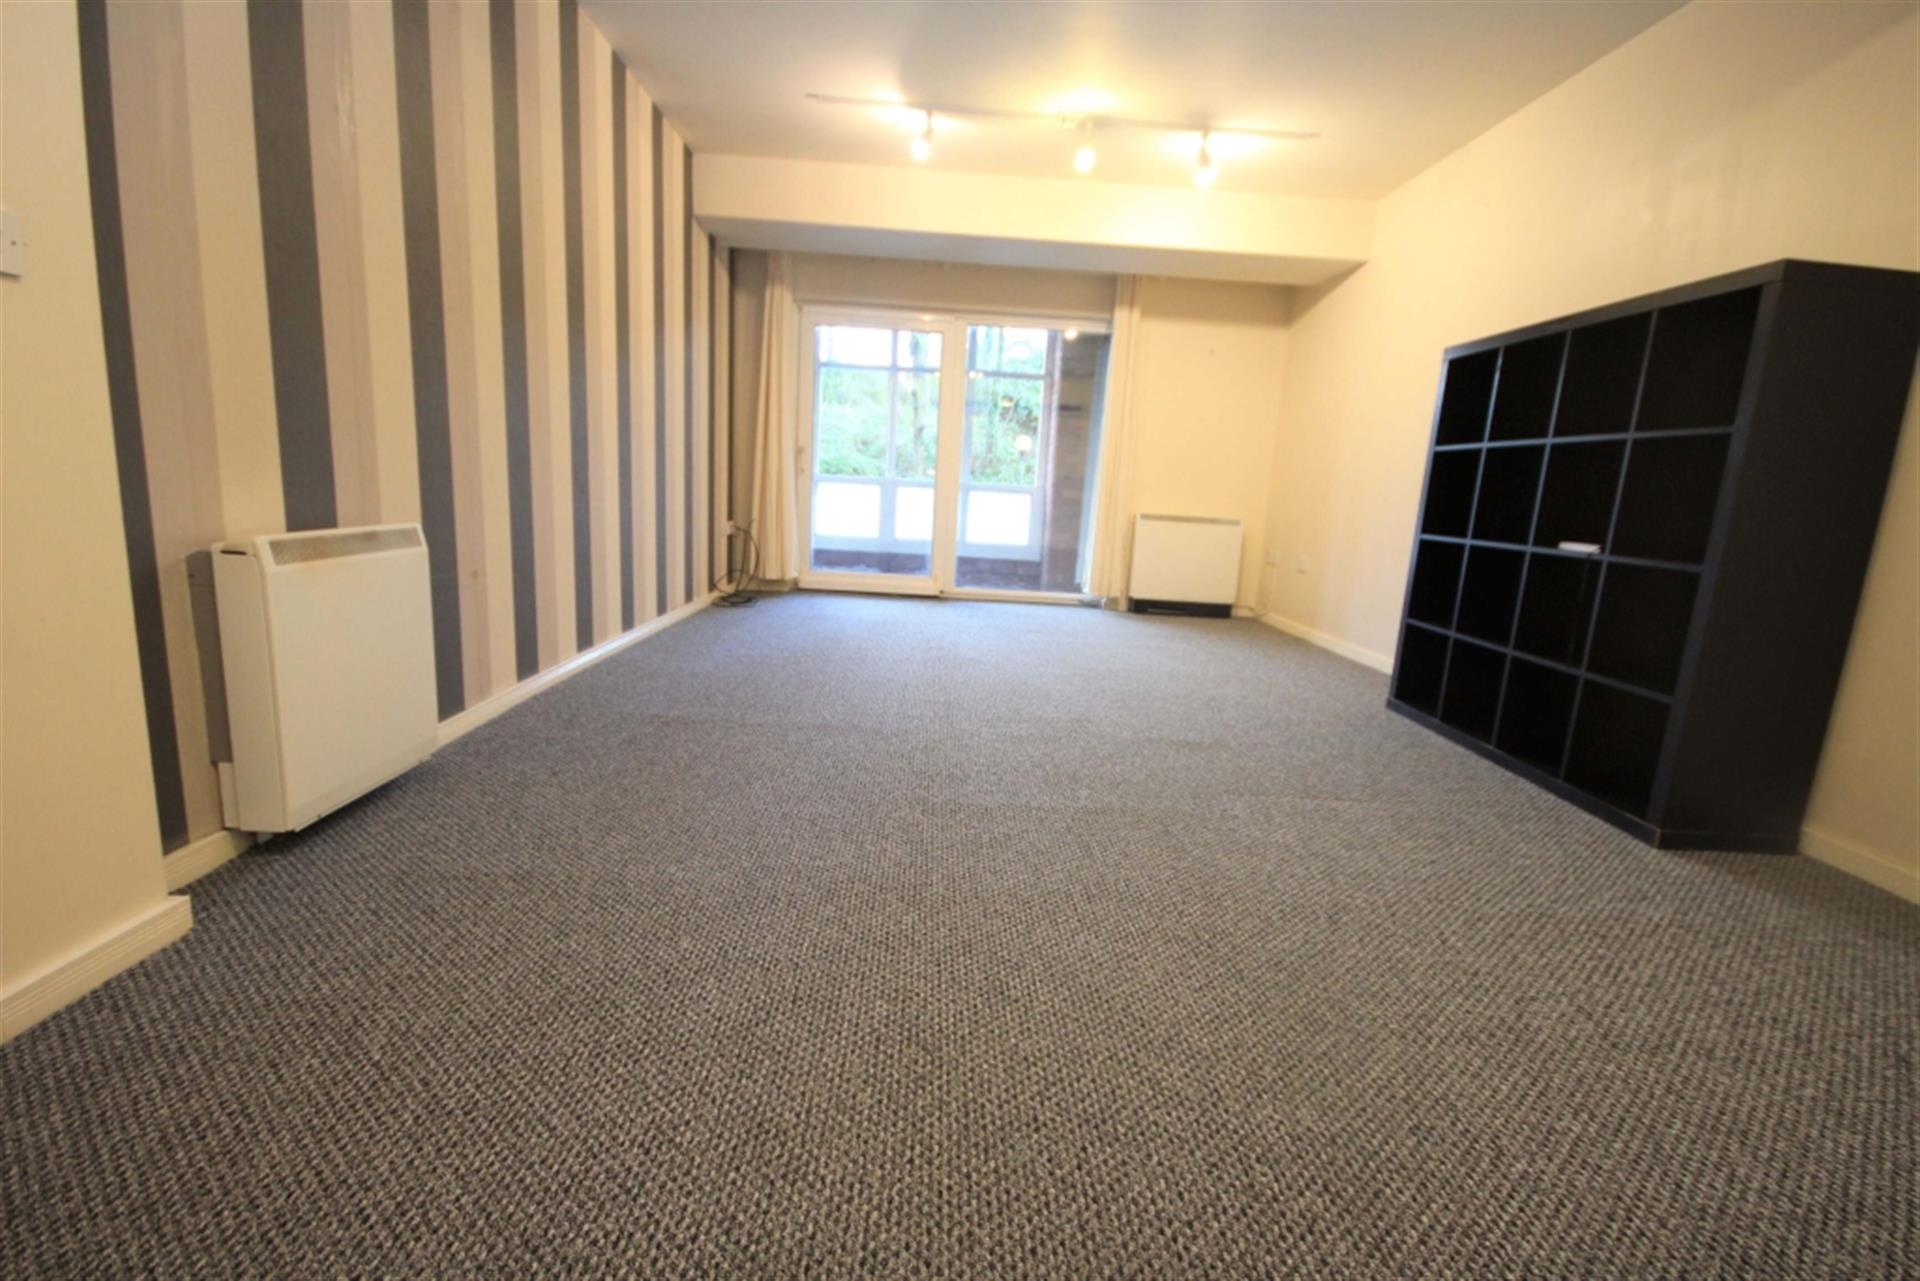 1 bedroom apartment flat / apartment To Let in Bolton, Greater Manchester - Property photograph